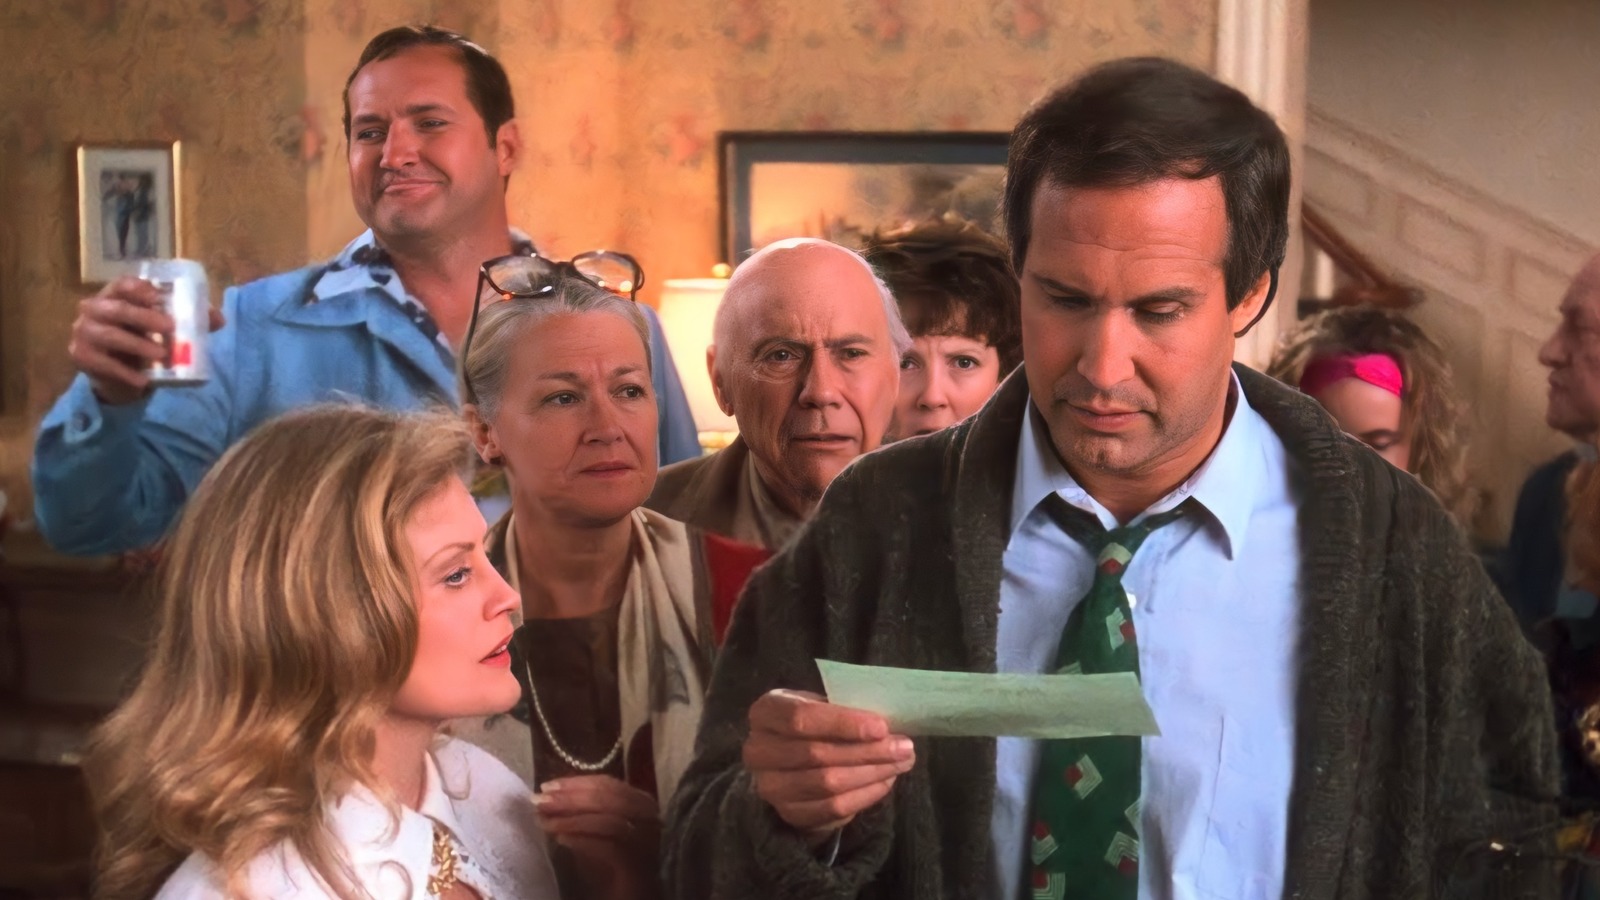 A National Lampoon’s Christmas Vacation Mystery May Have Been Solved On Reddit